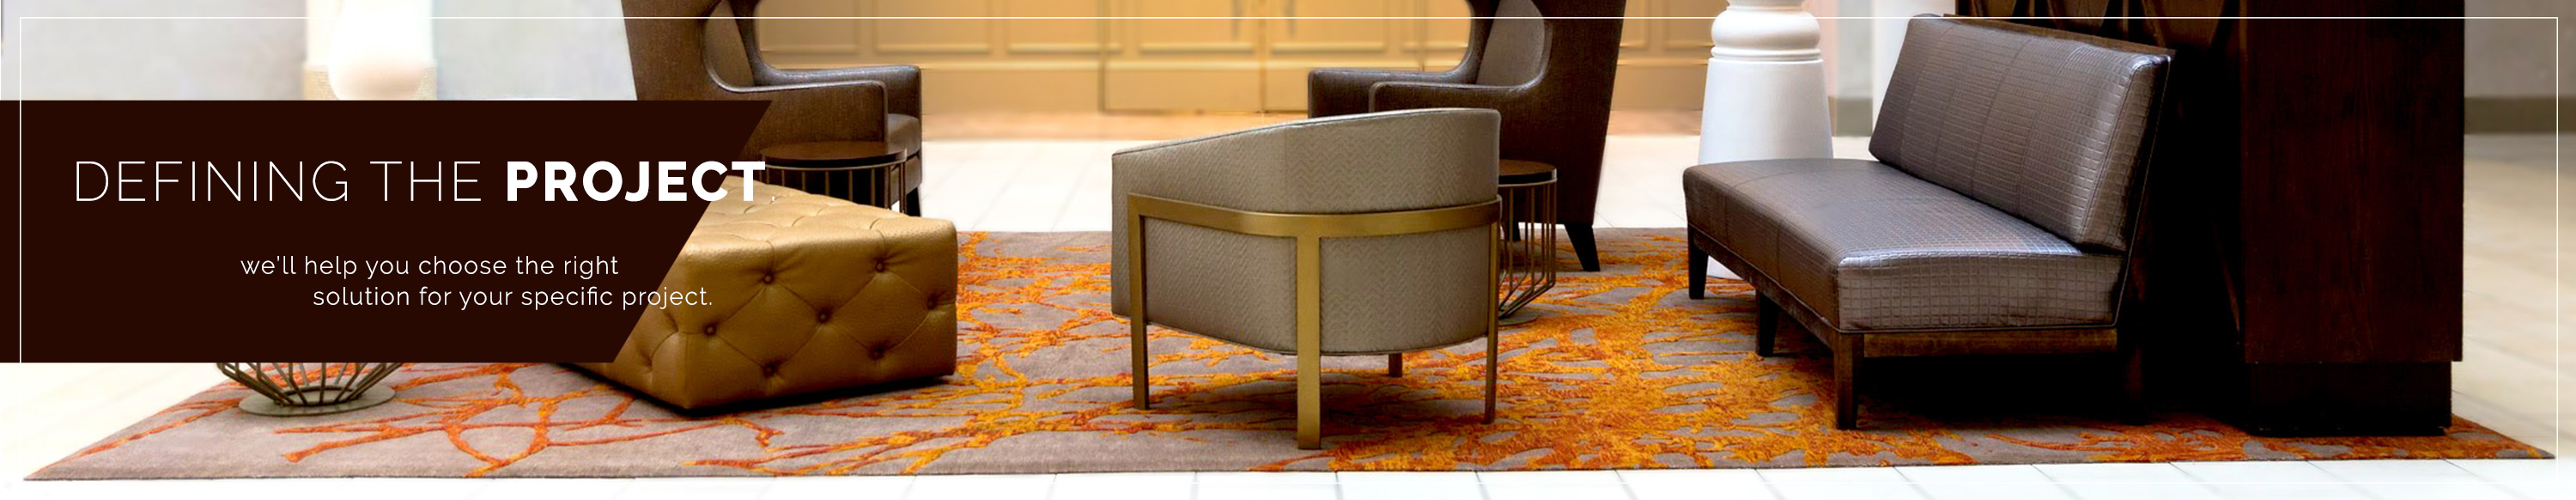 Defining the project. At ModernRugs.com we'll help you choose the right rug solution for your specific project.